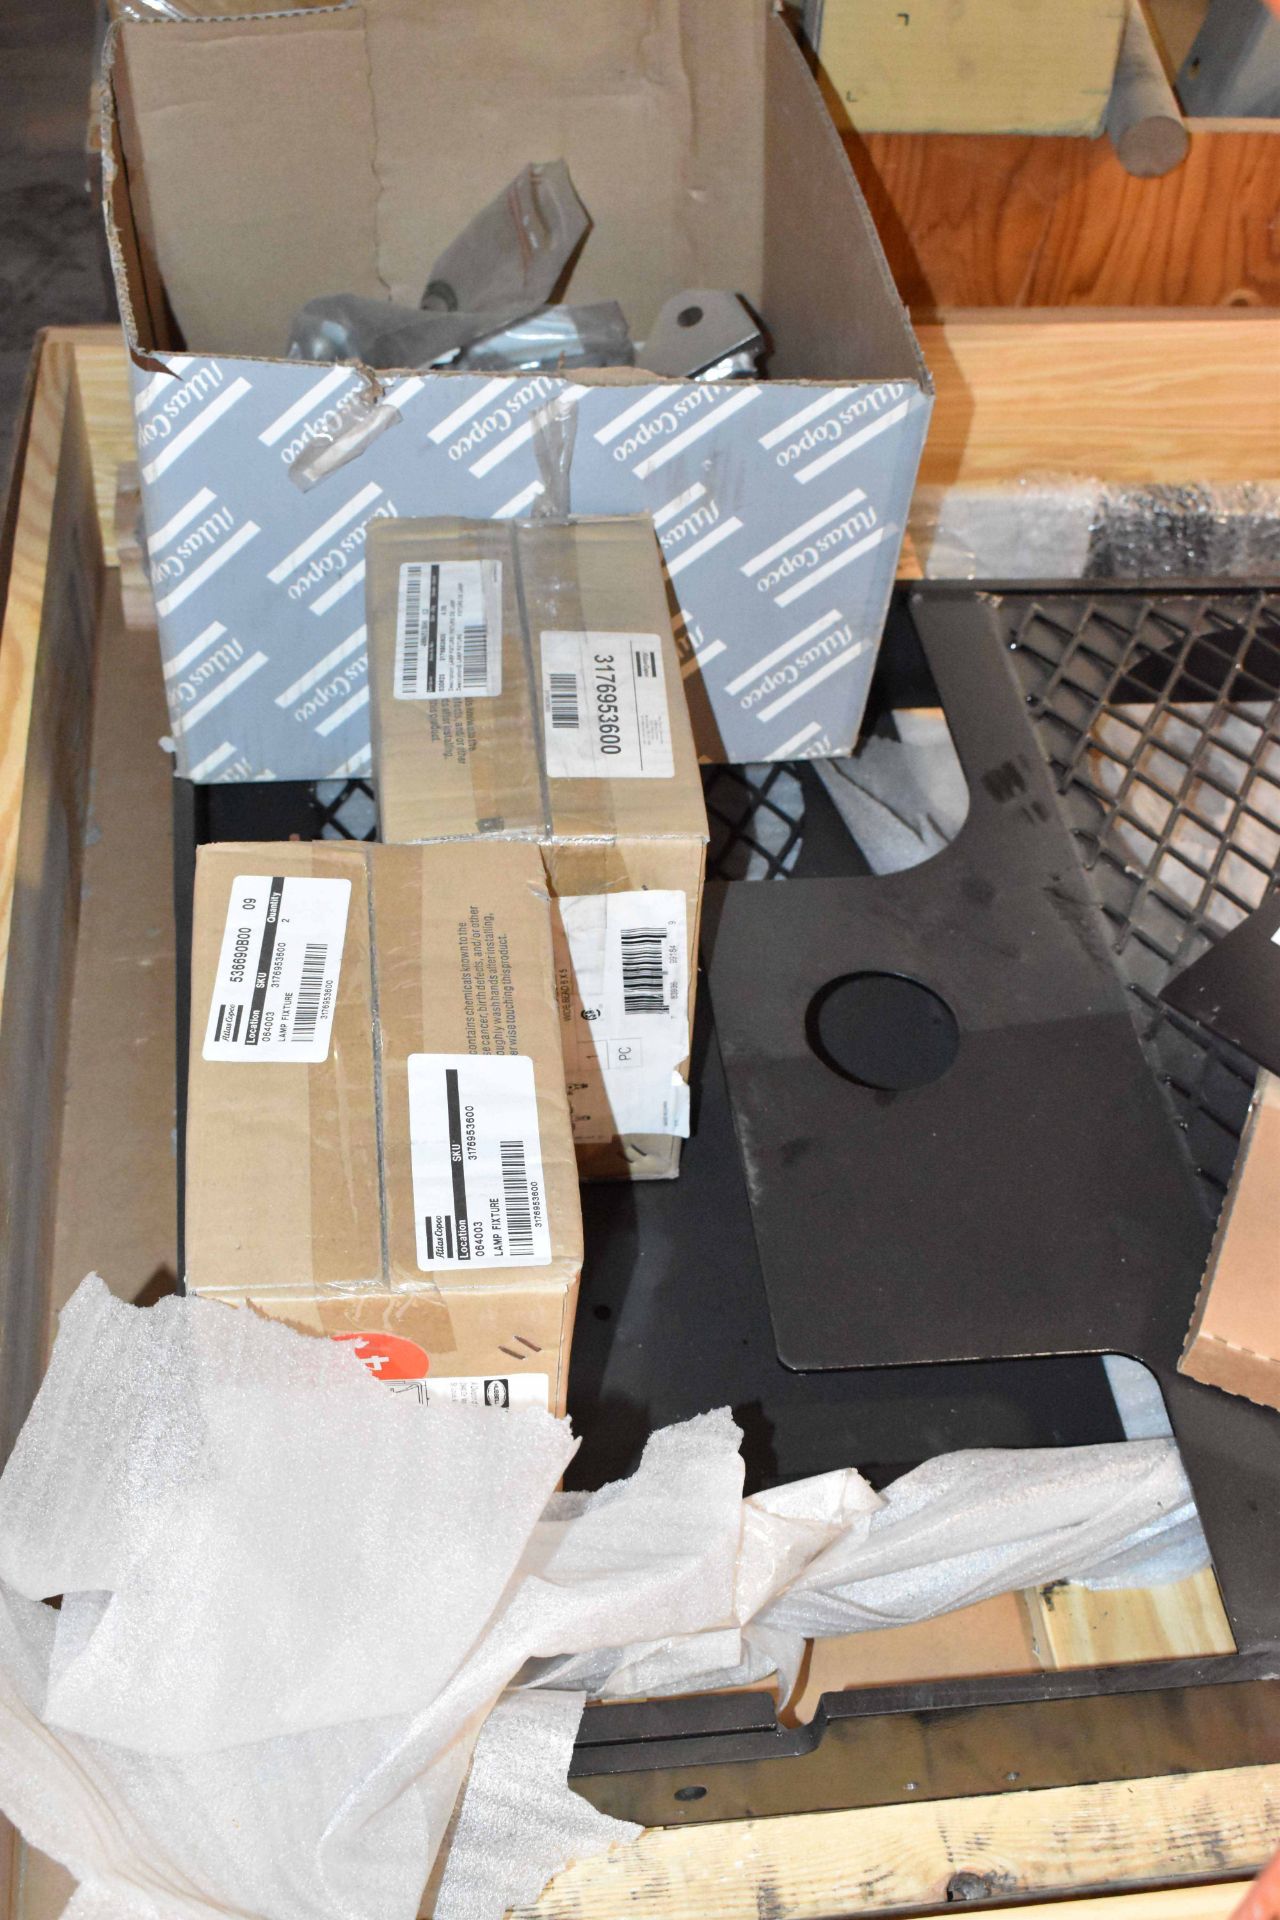 LOT/ CRATE WITH EPIROC MOBILE EQUIPMENT PARTS (CMD WAREHOUSE - 09010101) - Image 3 of 3